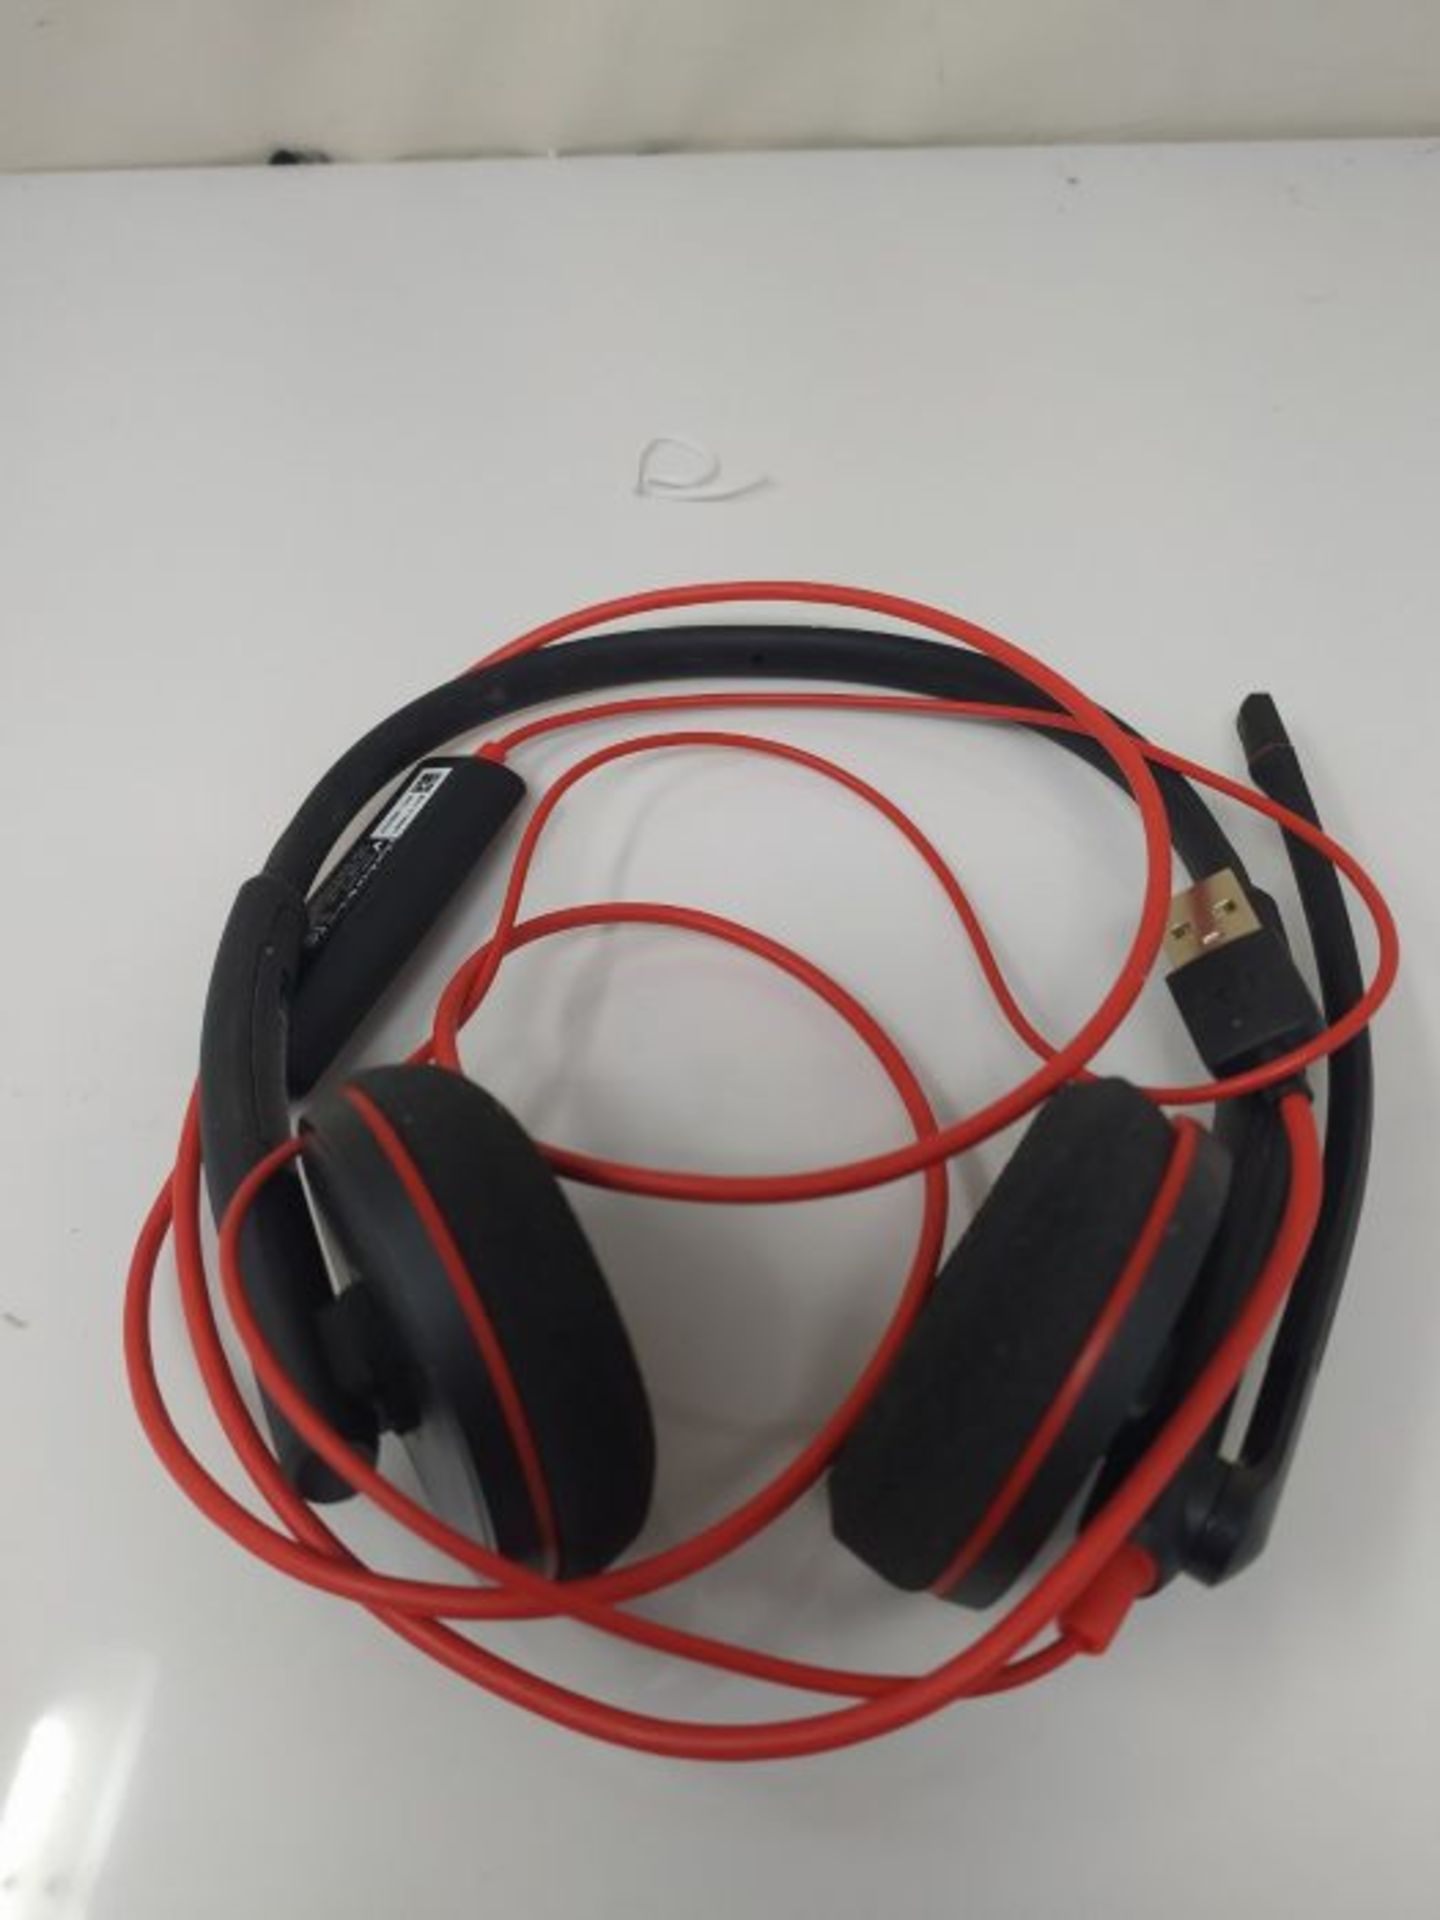 Plantronics - Blackwire 3220 - Wired Dual-Ear (Stereo) Headset with Boom Mic - USB-A t - Image 2 of 2